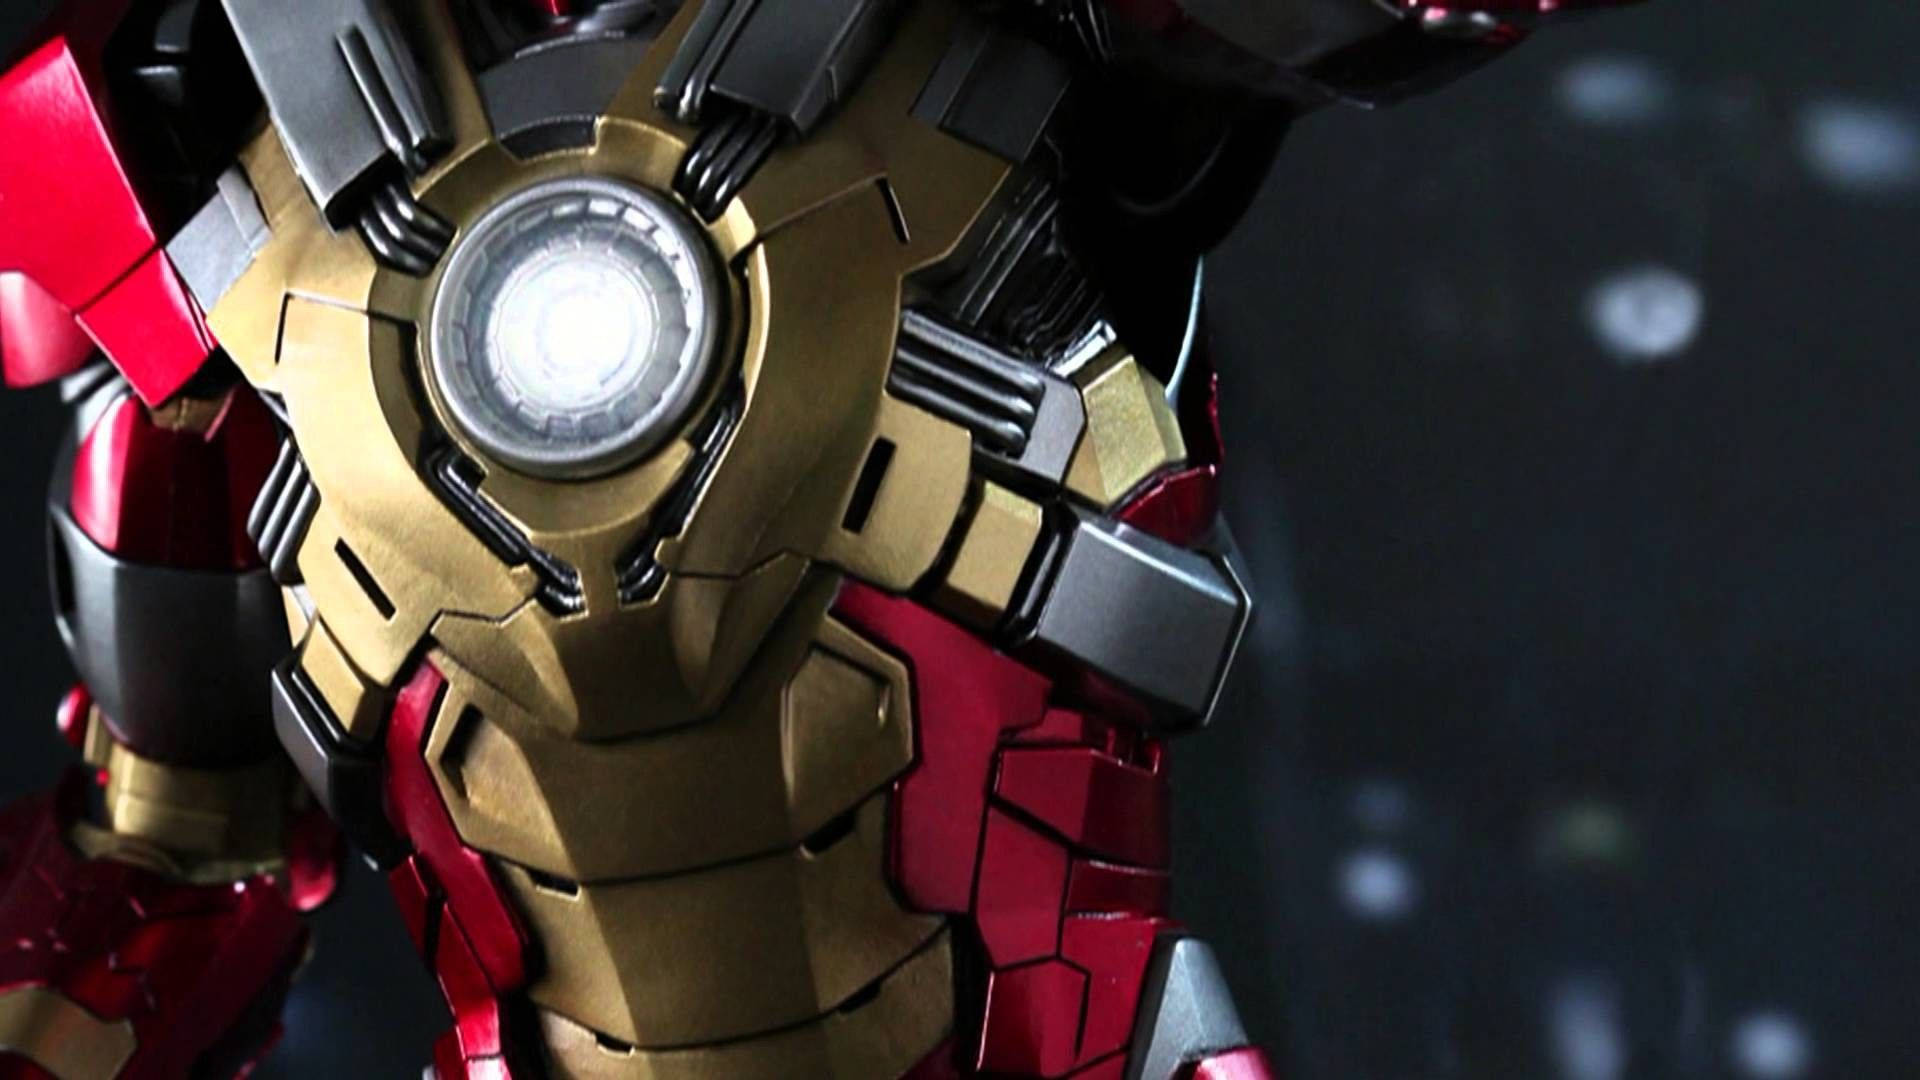 Iron Man Mark 3 suits up with arc reactor powering the suit Wallpaper